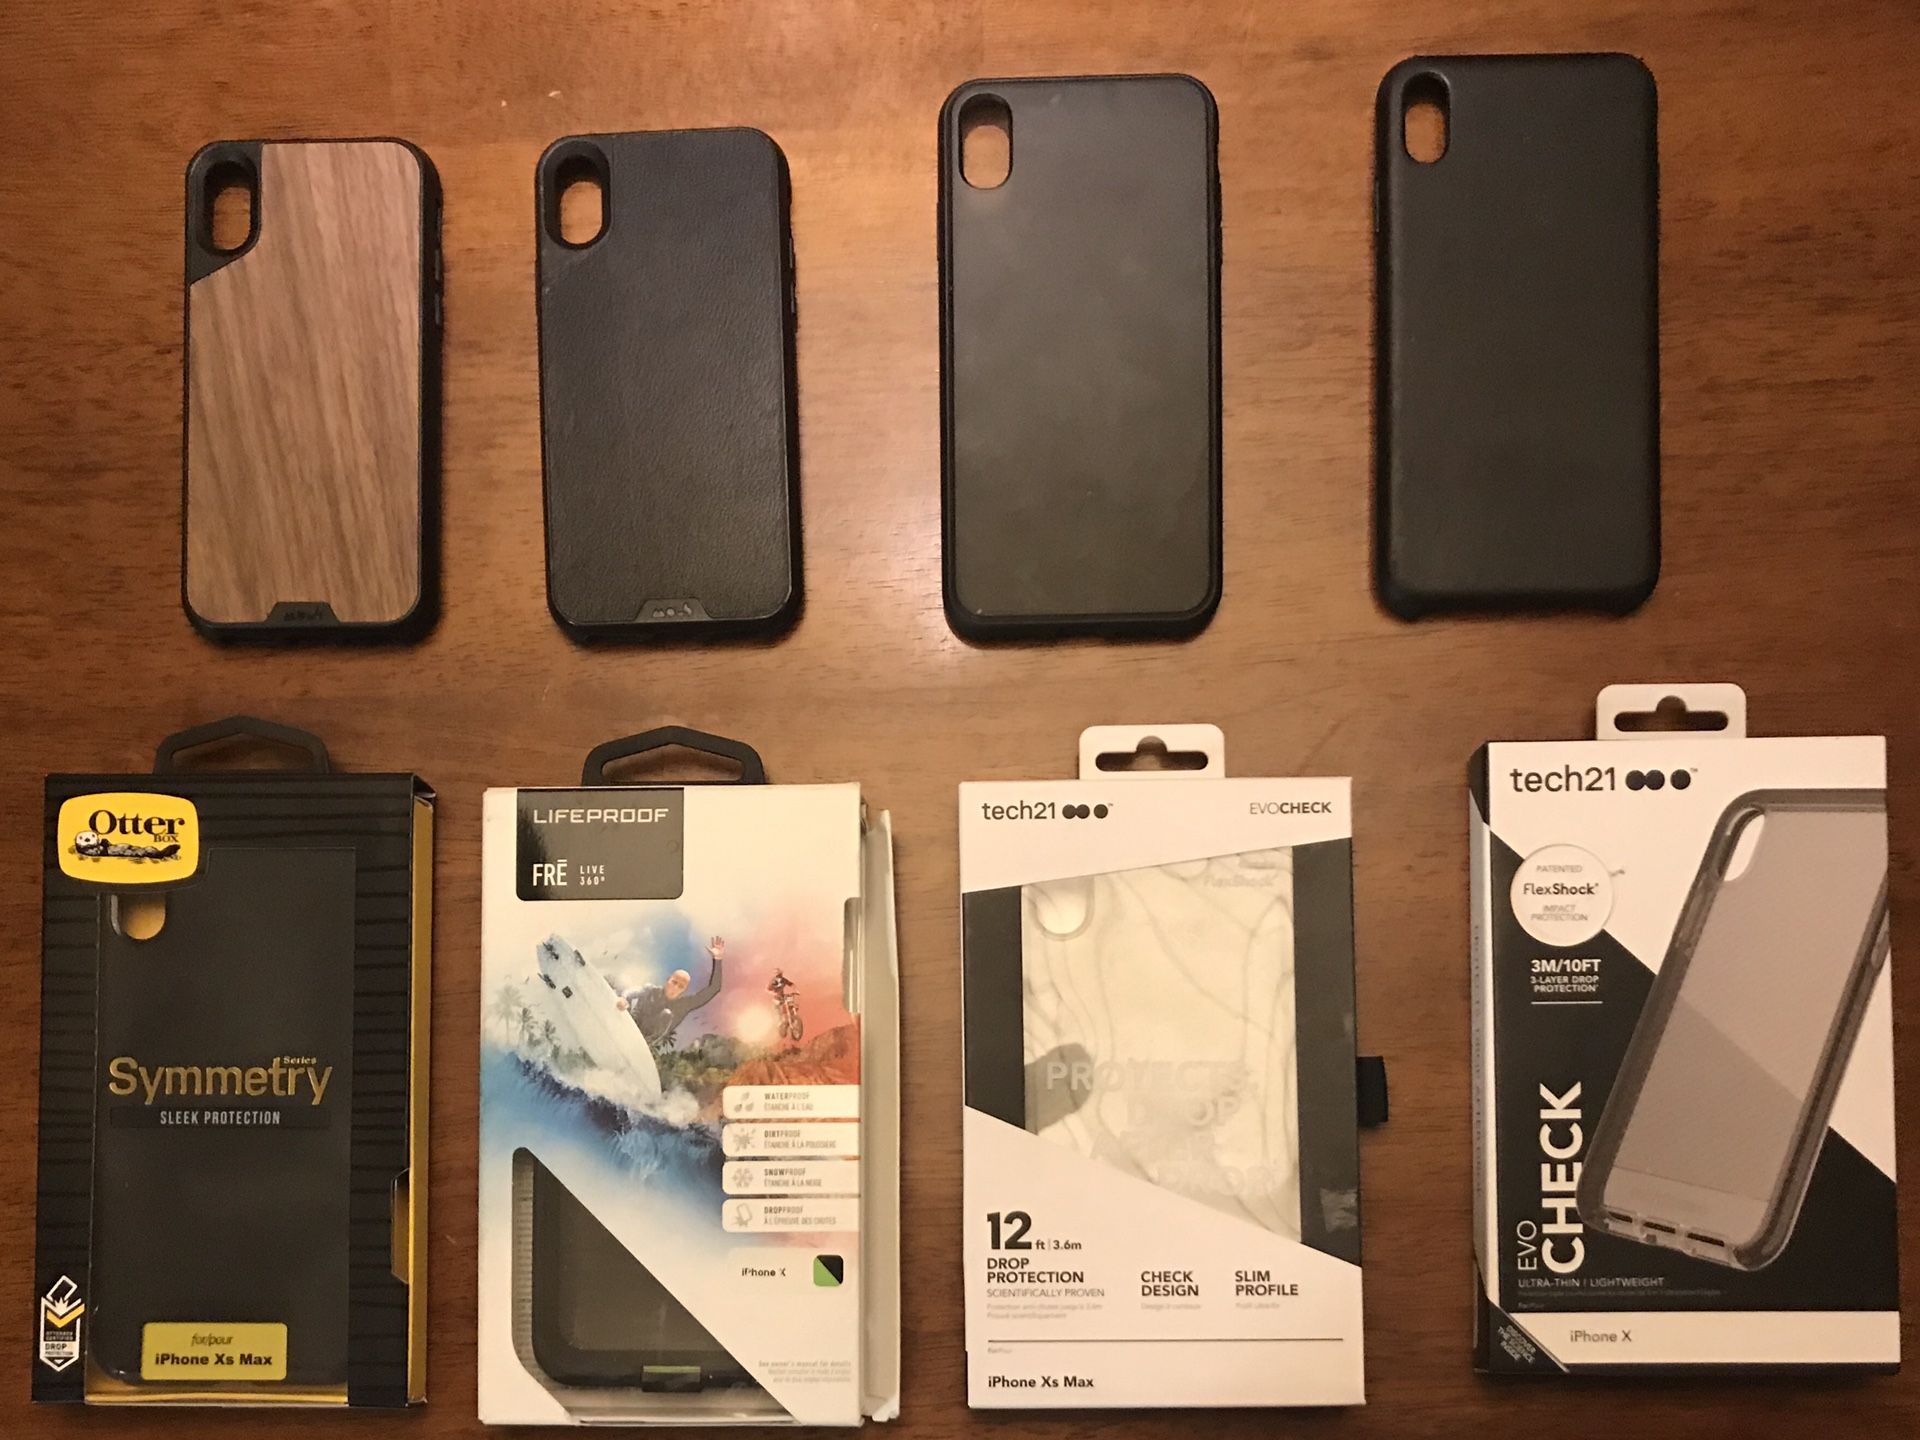 iPhone X/XS and iPhone XS Max cases